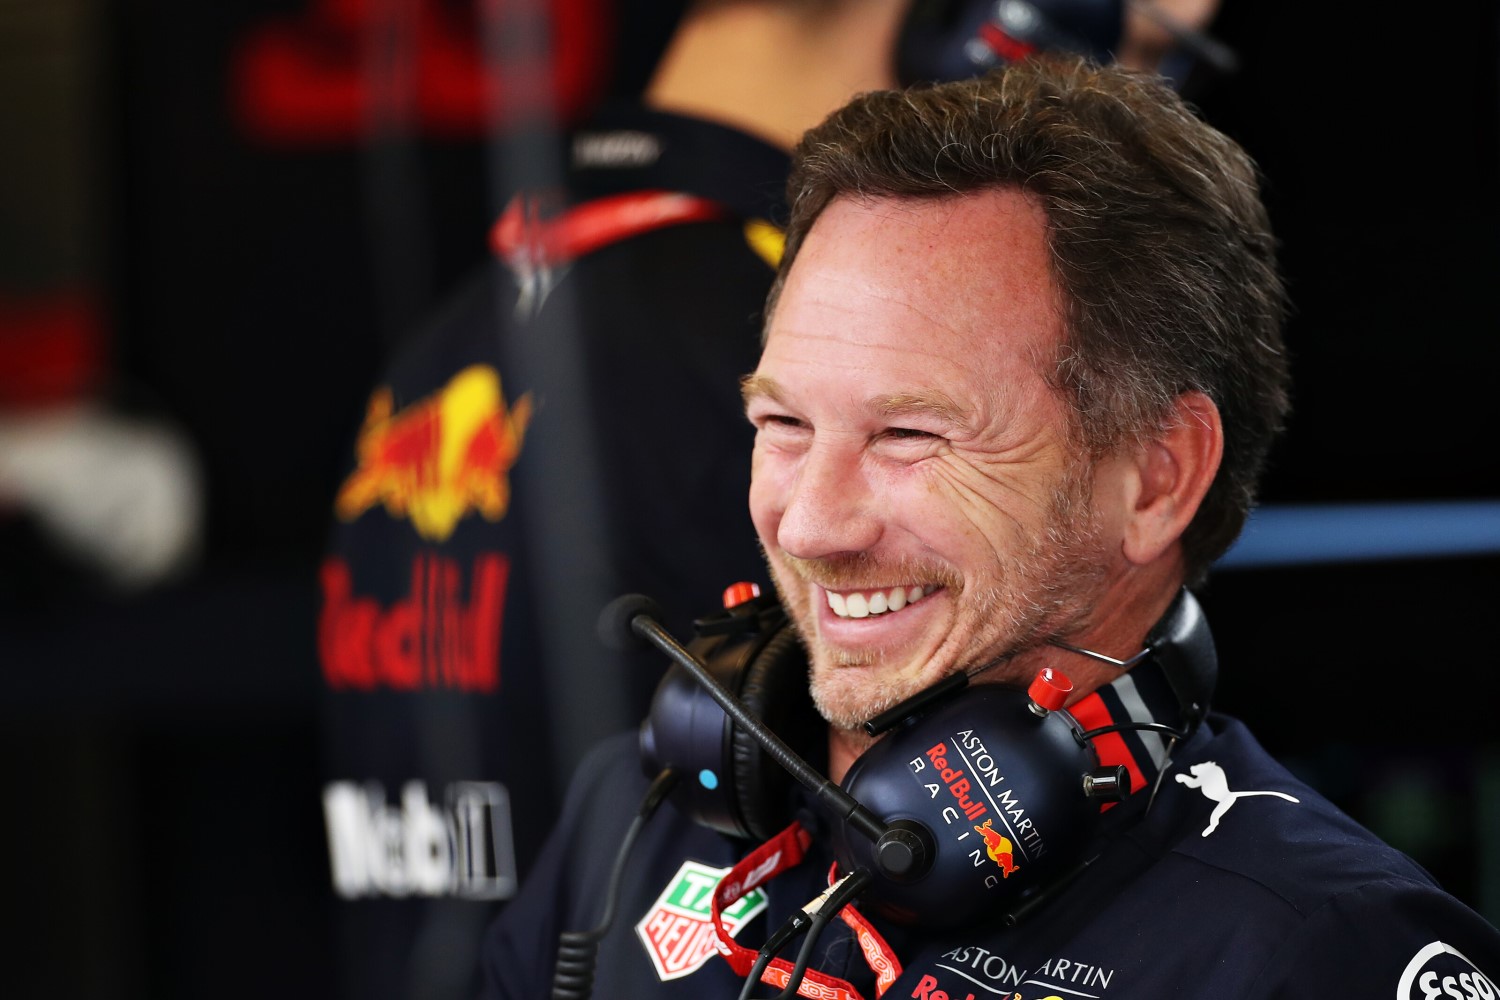 Christian Horner says his team was ready to race